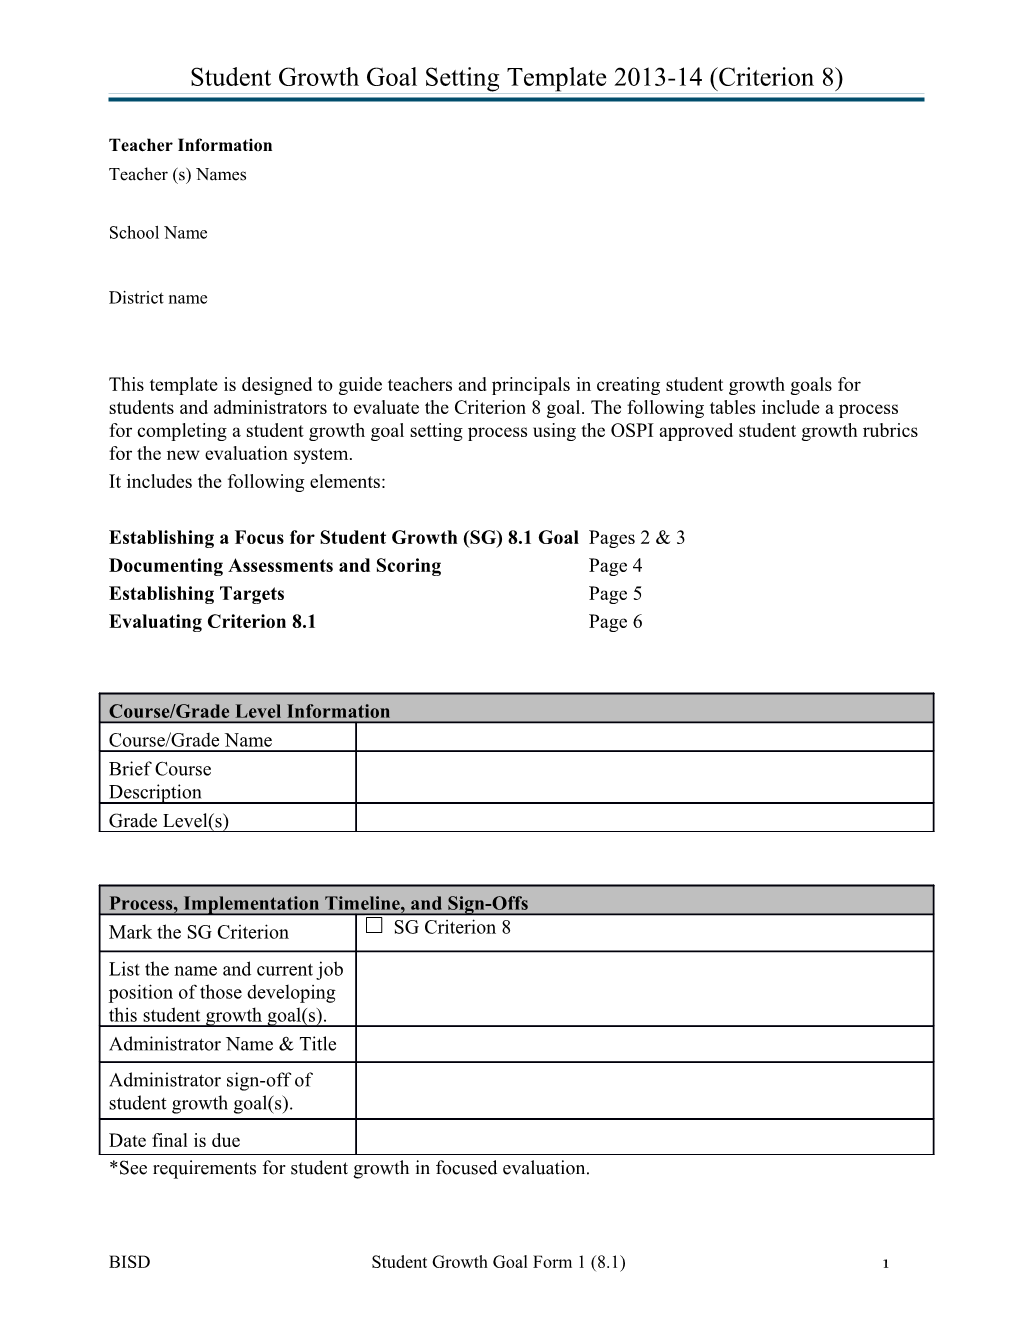 Student Growth Goal Setting Template 2013-14 (Criterion 8)